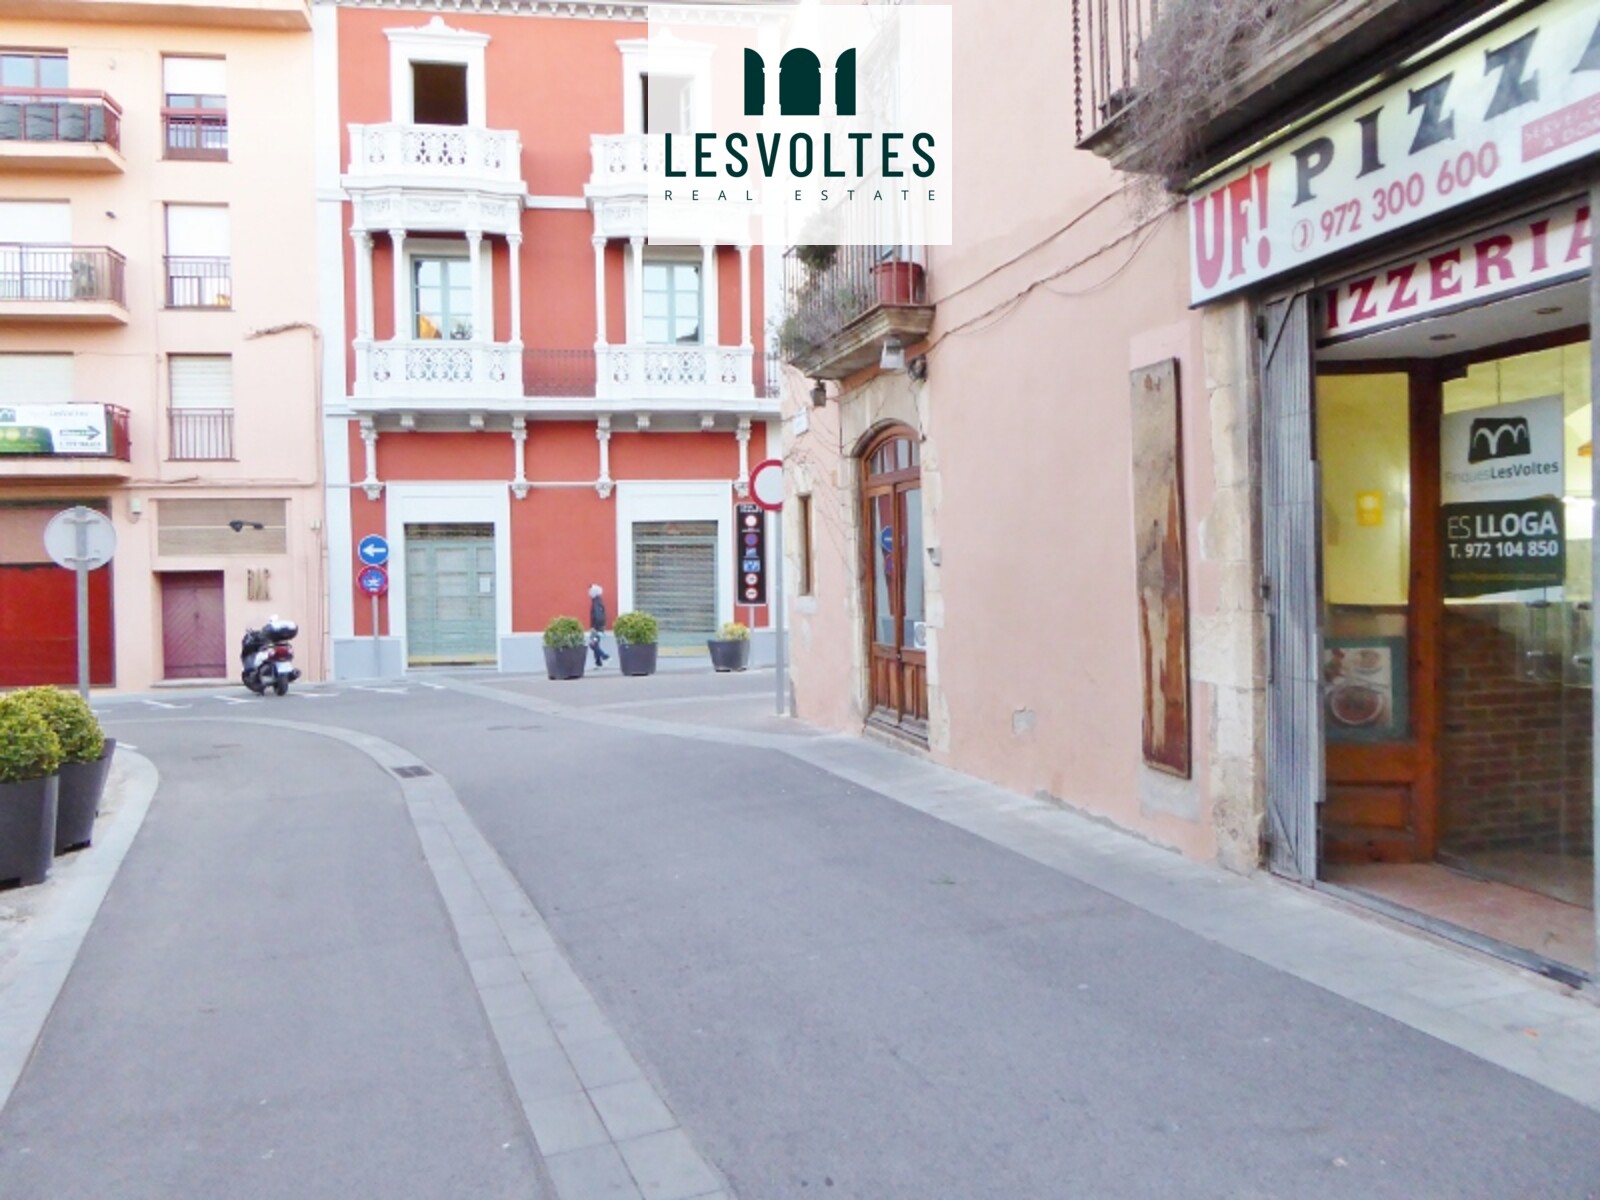 COMMERCIAL RENT IN THE CENTER OF PALAFRUGELL. MANY POSSIBILITIES